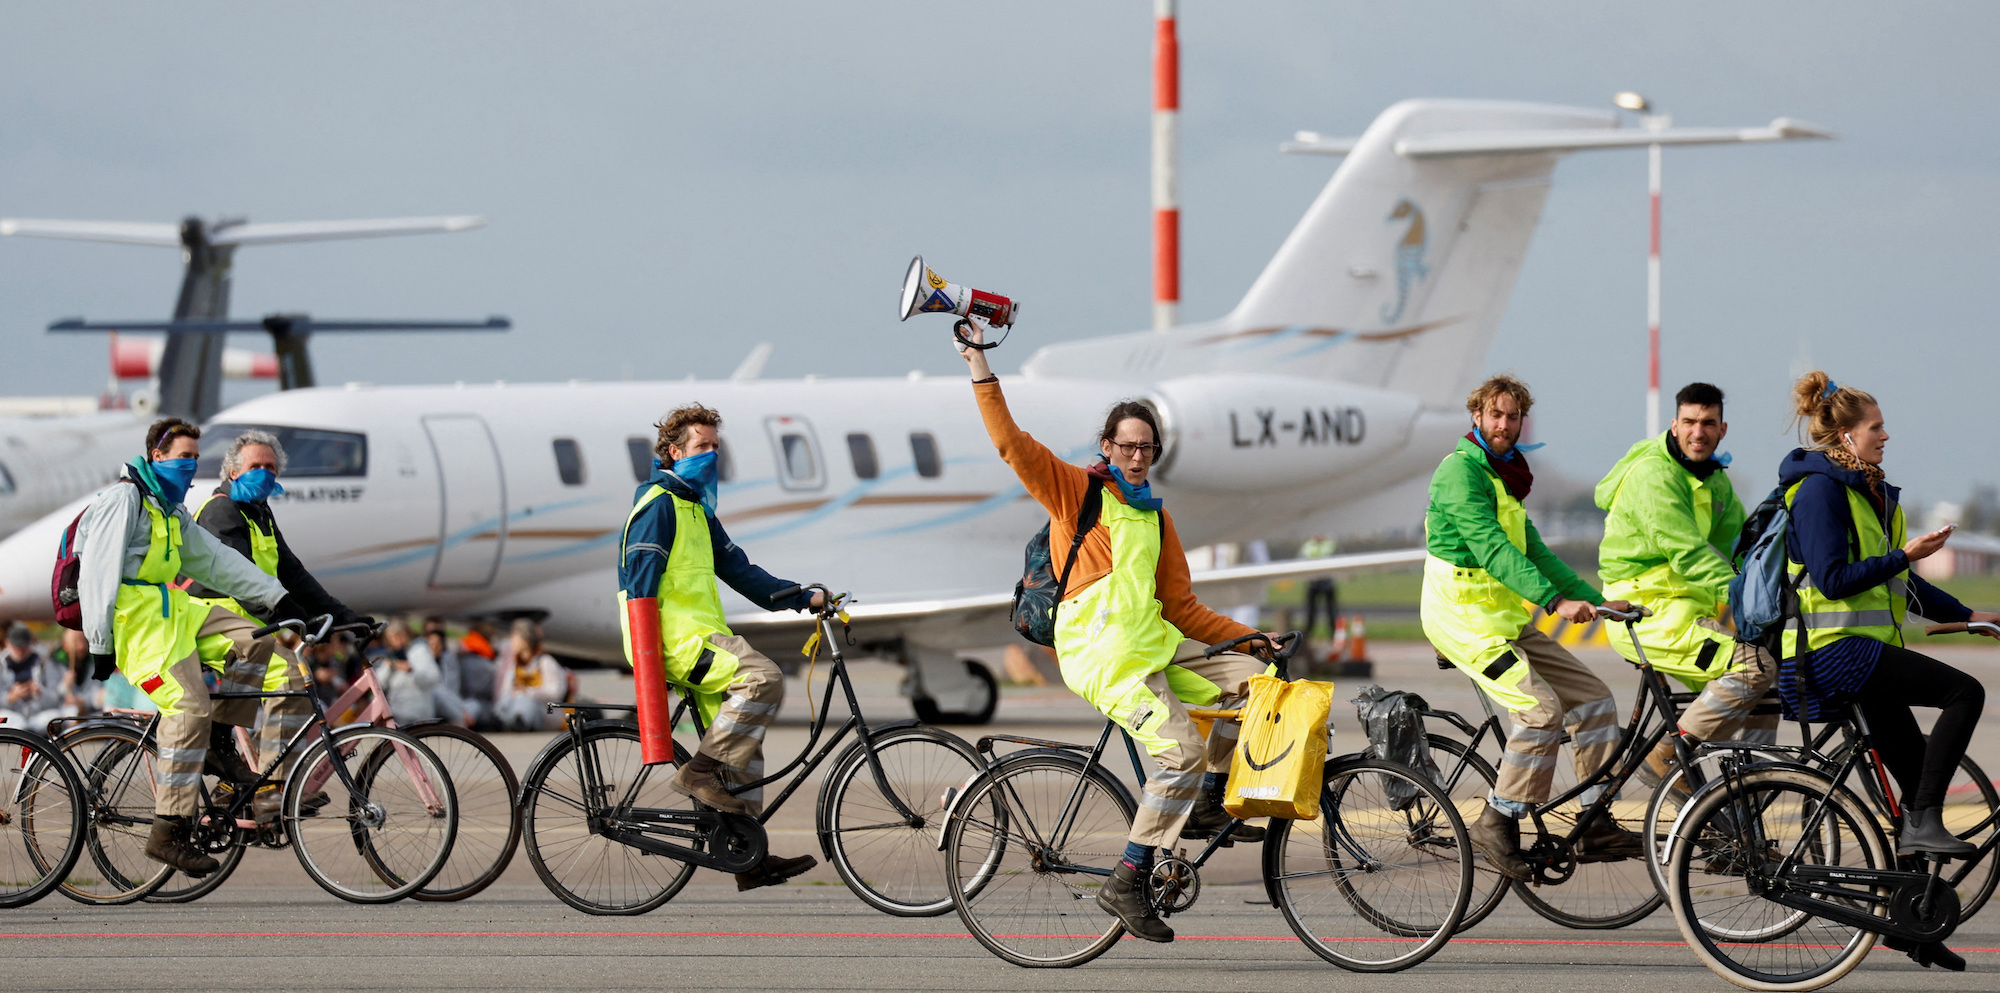 A Brief History of Anti-Aviation Protests at Airports in Europe